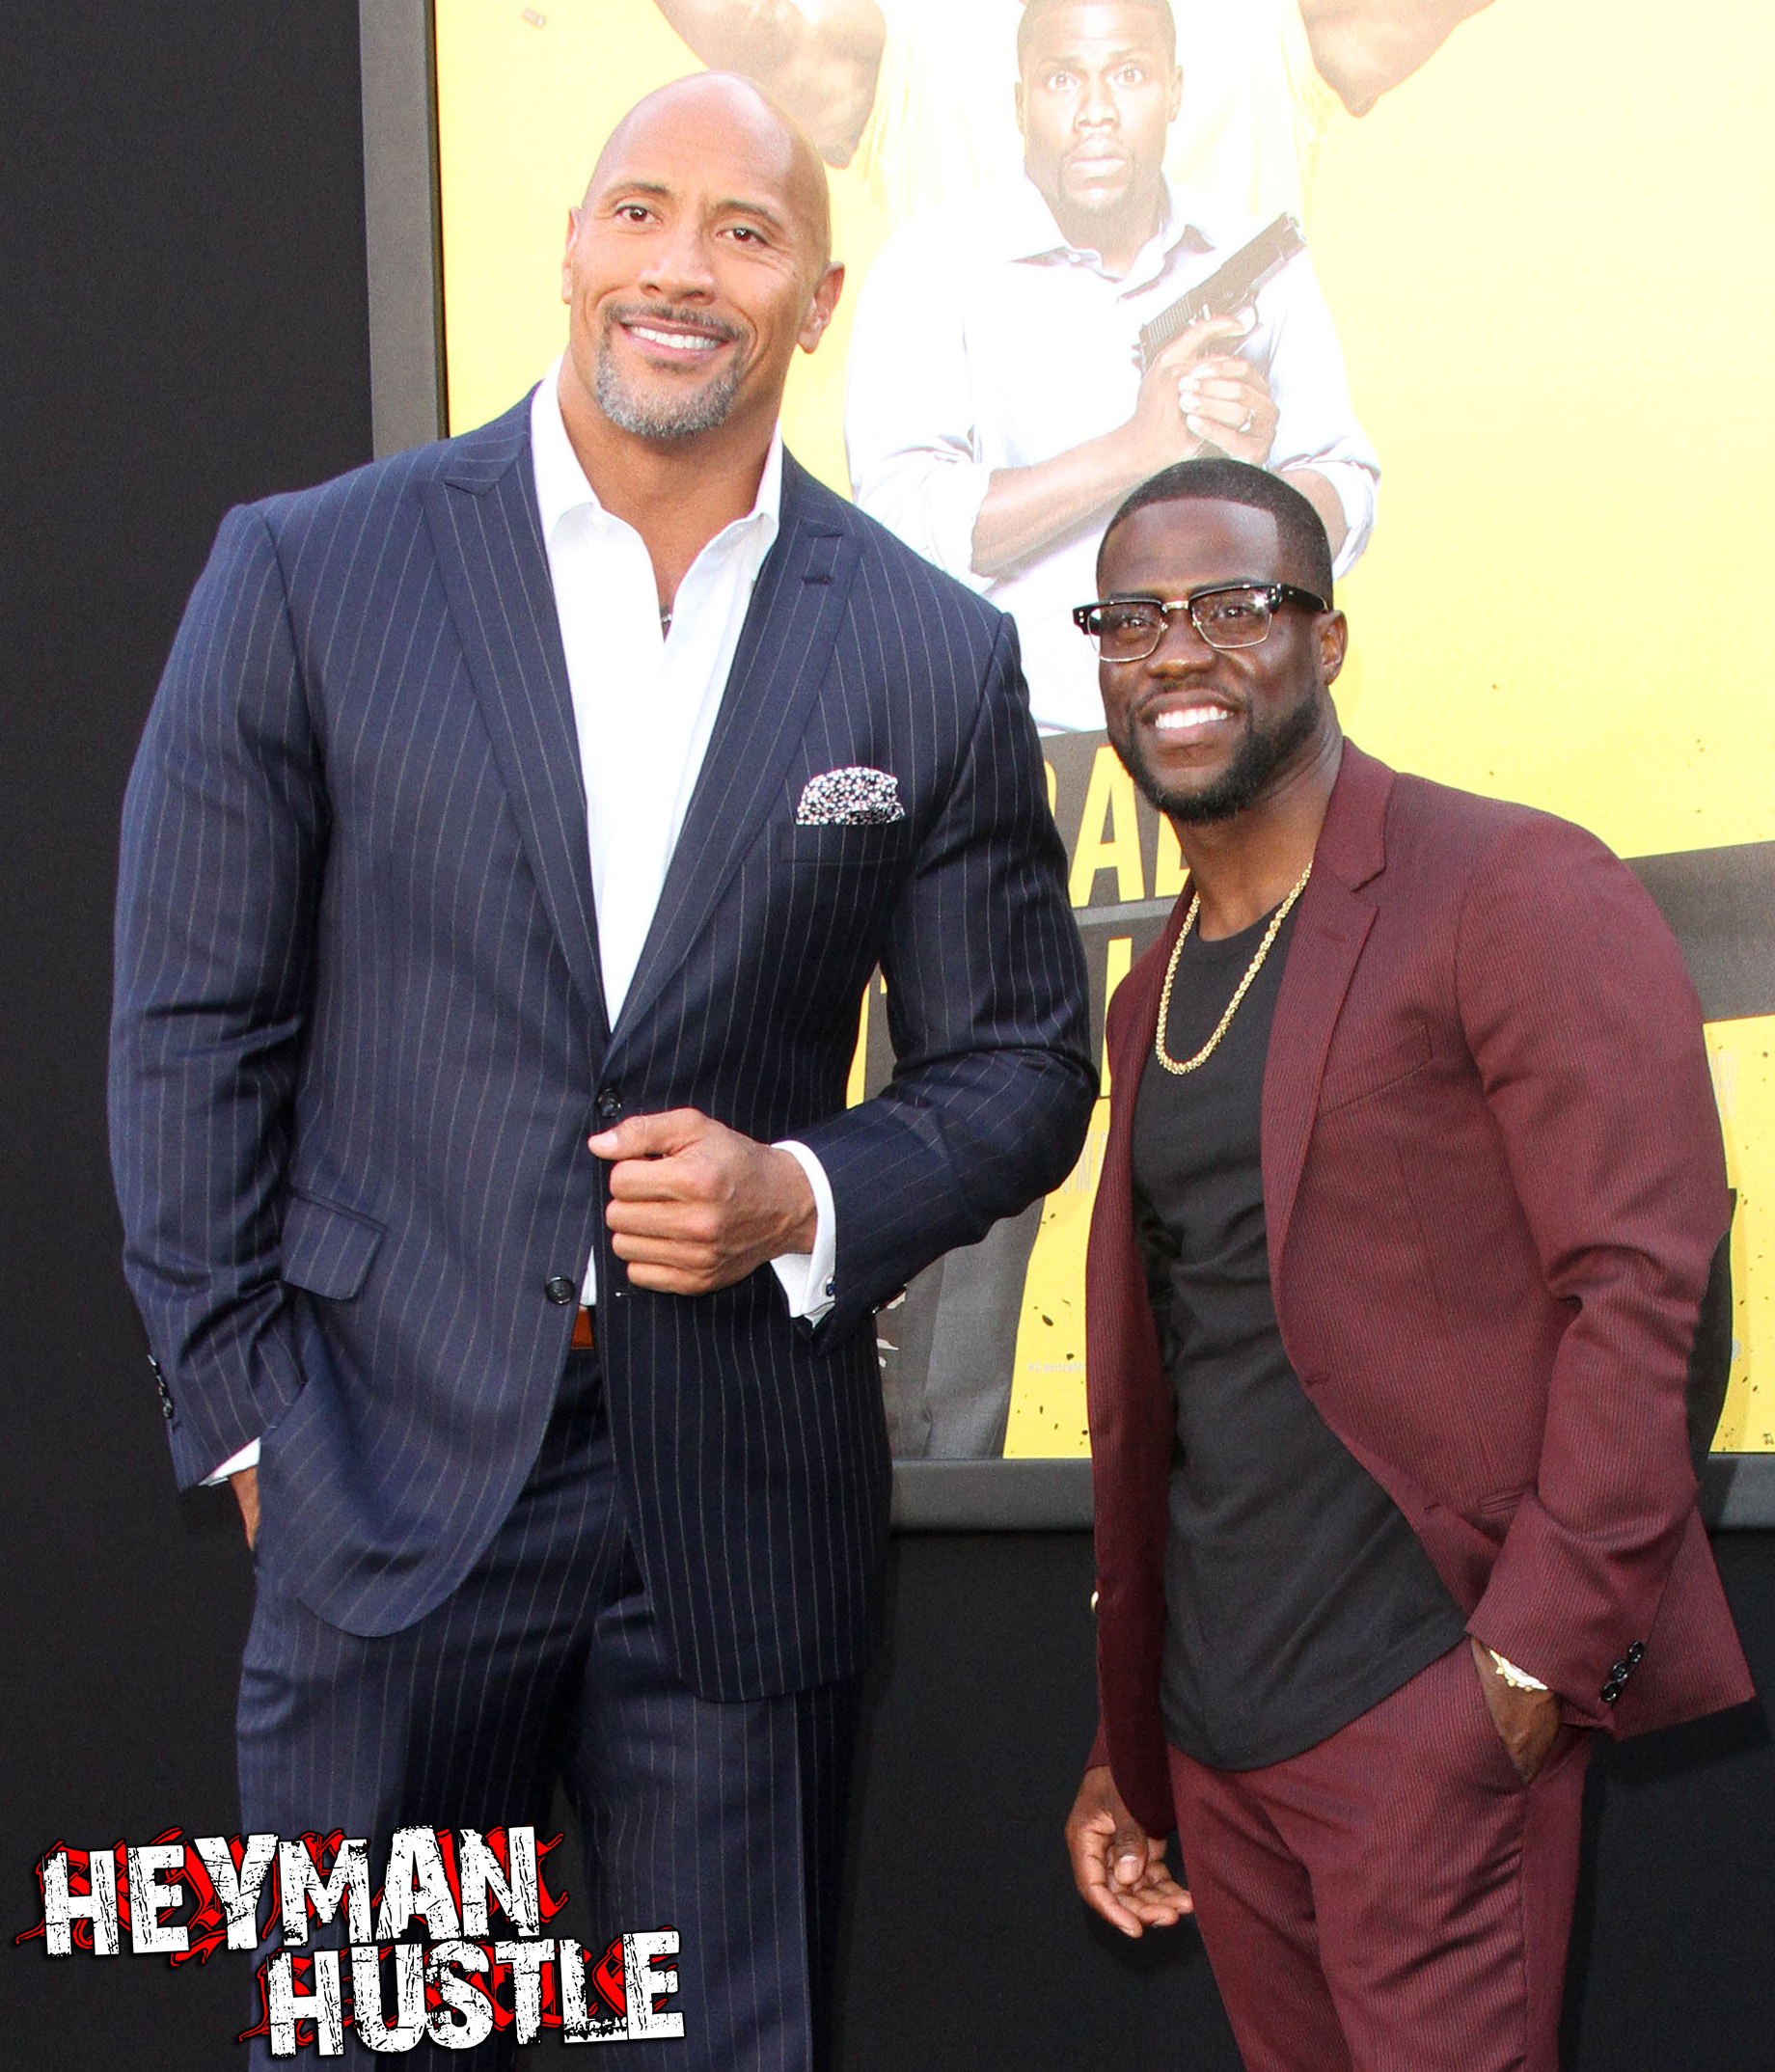 Dwayne 'The Rock' Johnson and Kevin Hart